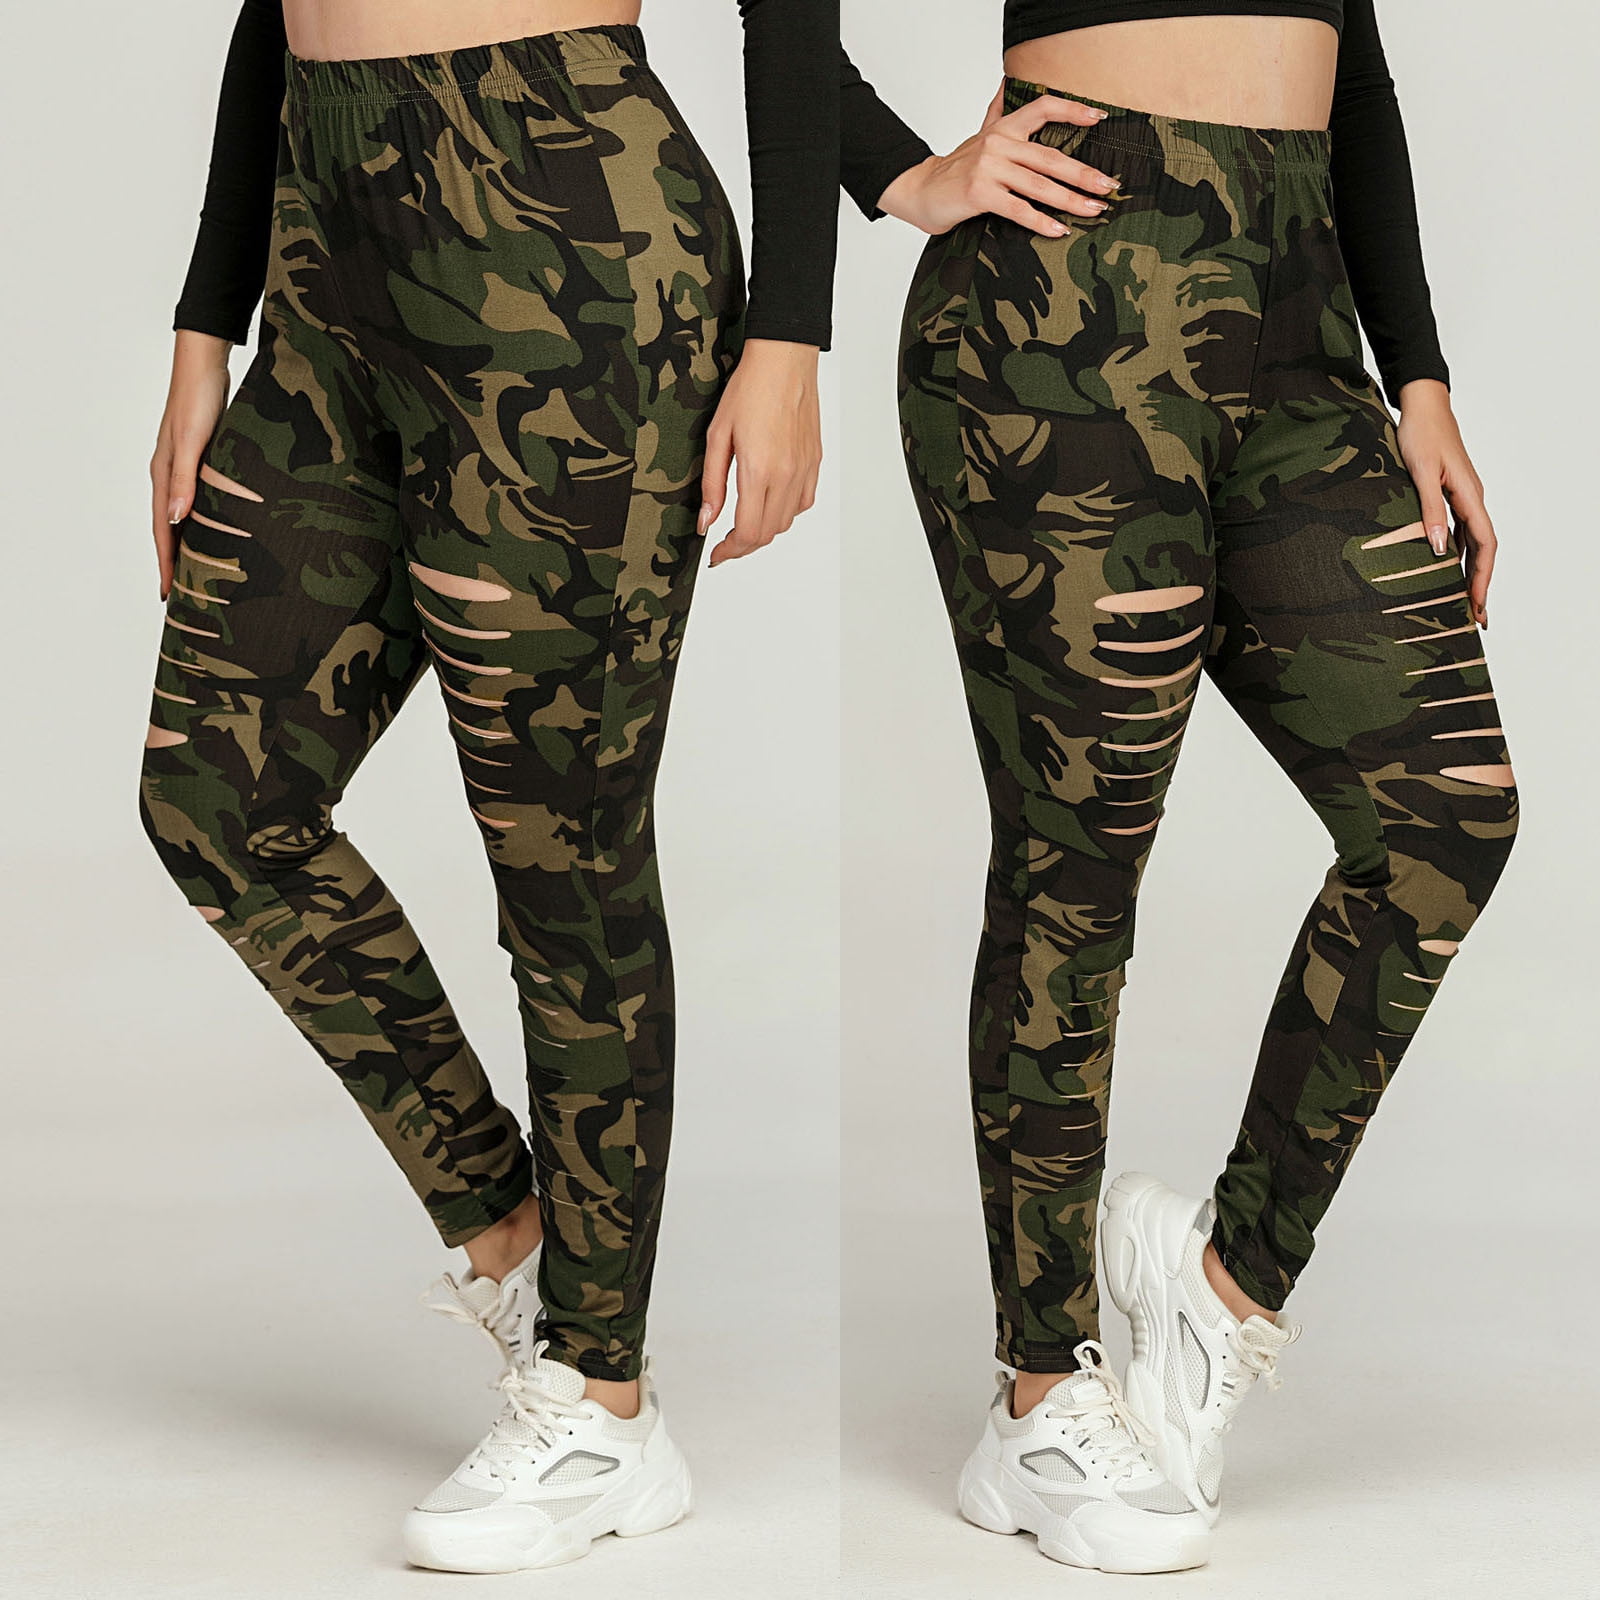 Sinwo Womens Plus Size Camouflage Leggings Trousers Sport Running Hole Casual Pants 